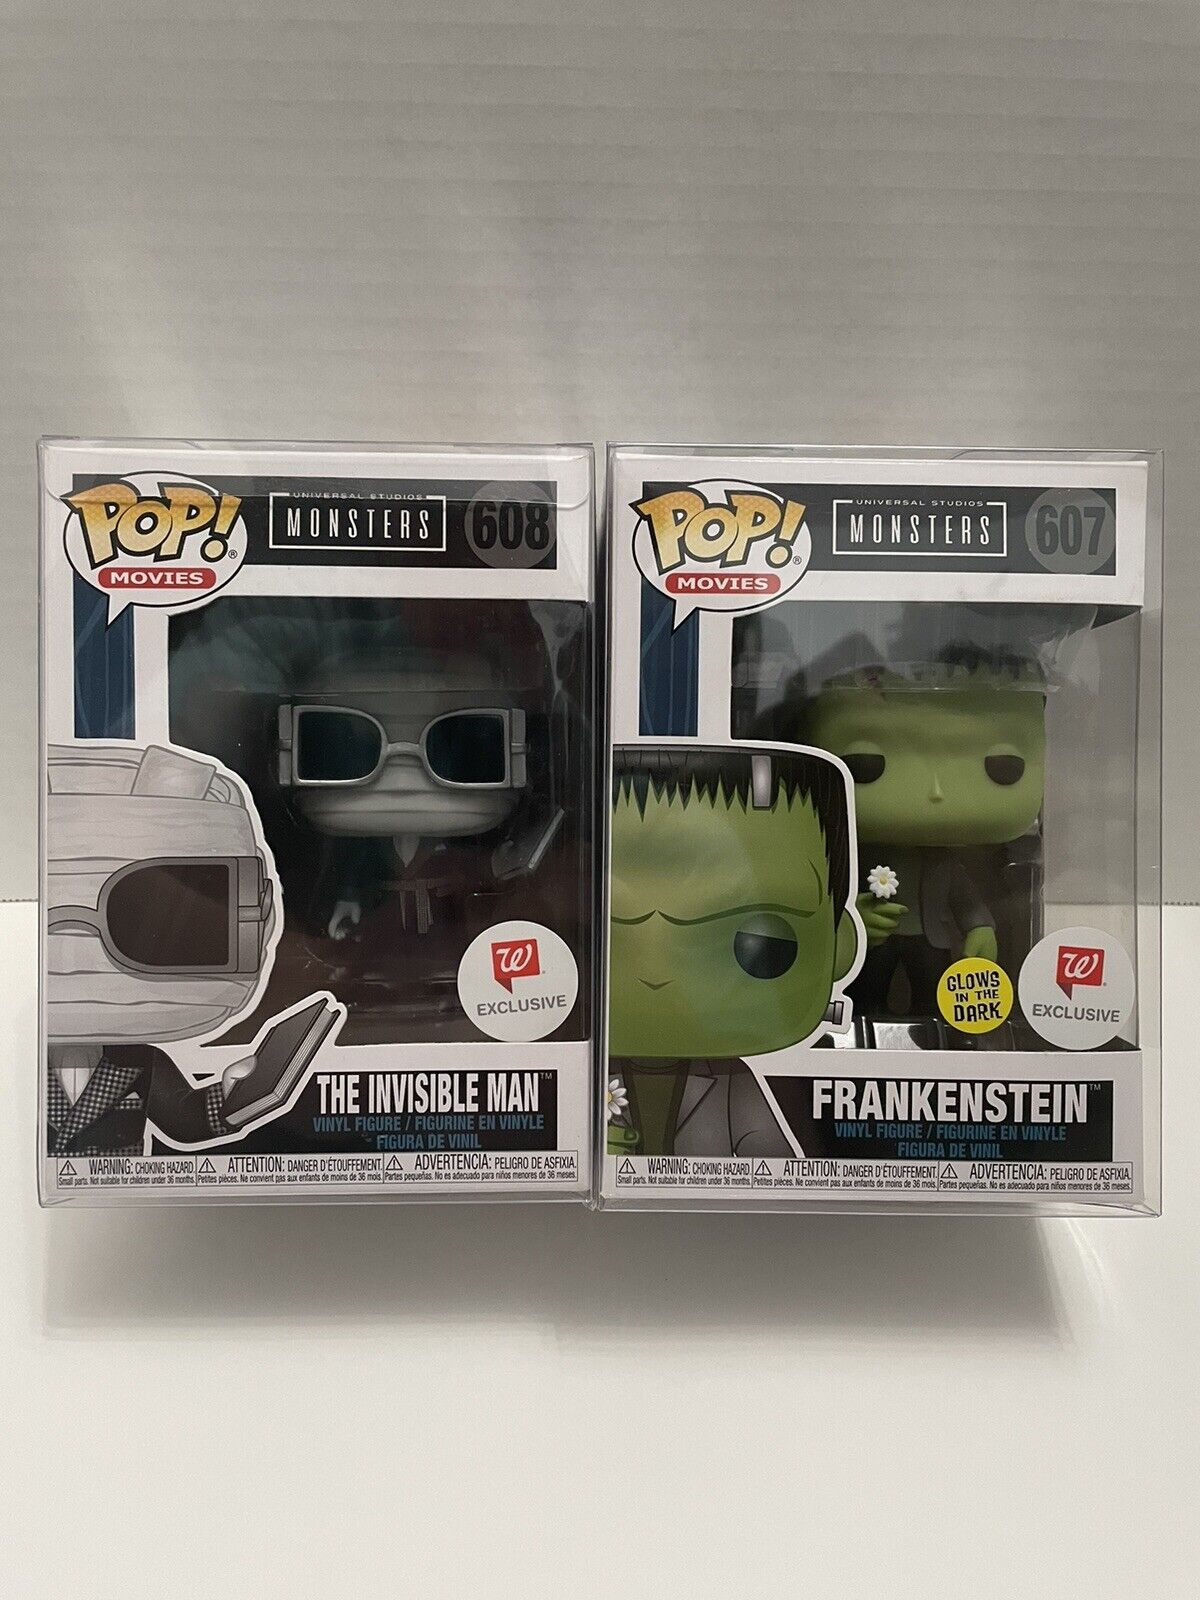 Funko Monsters Lot Of 2: #607 Frankenstein and #608 The Invisible Man